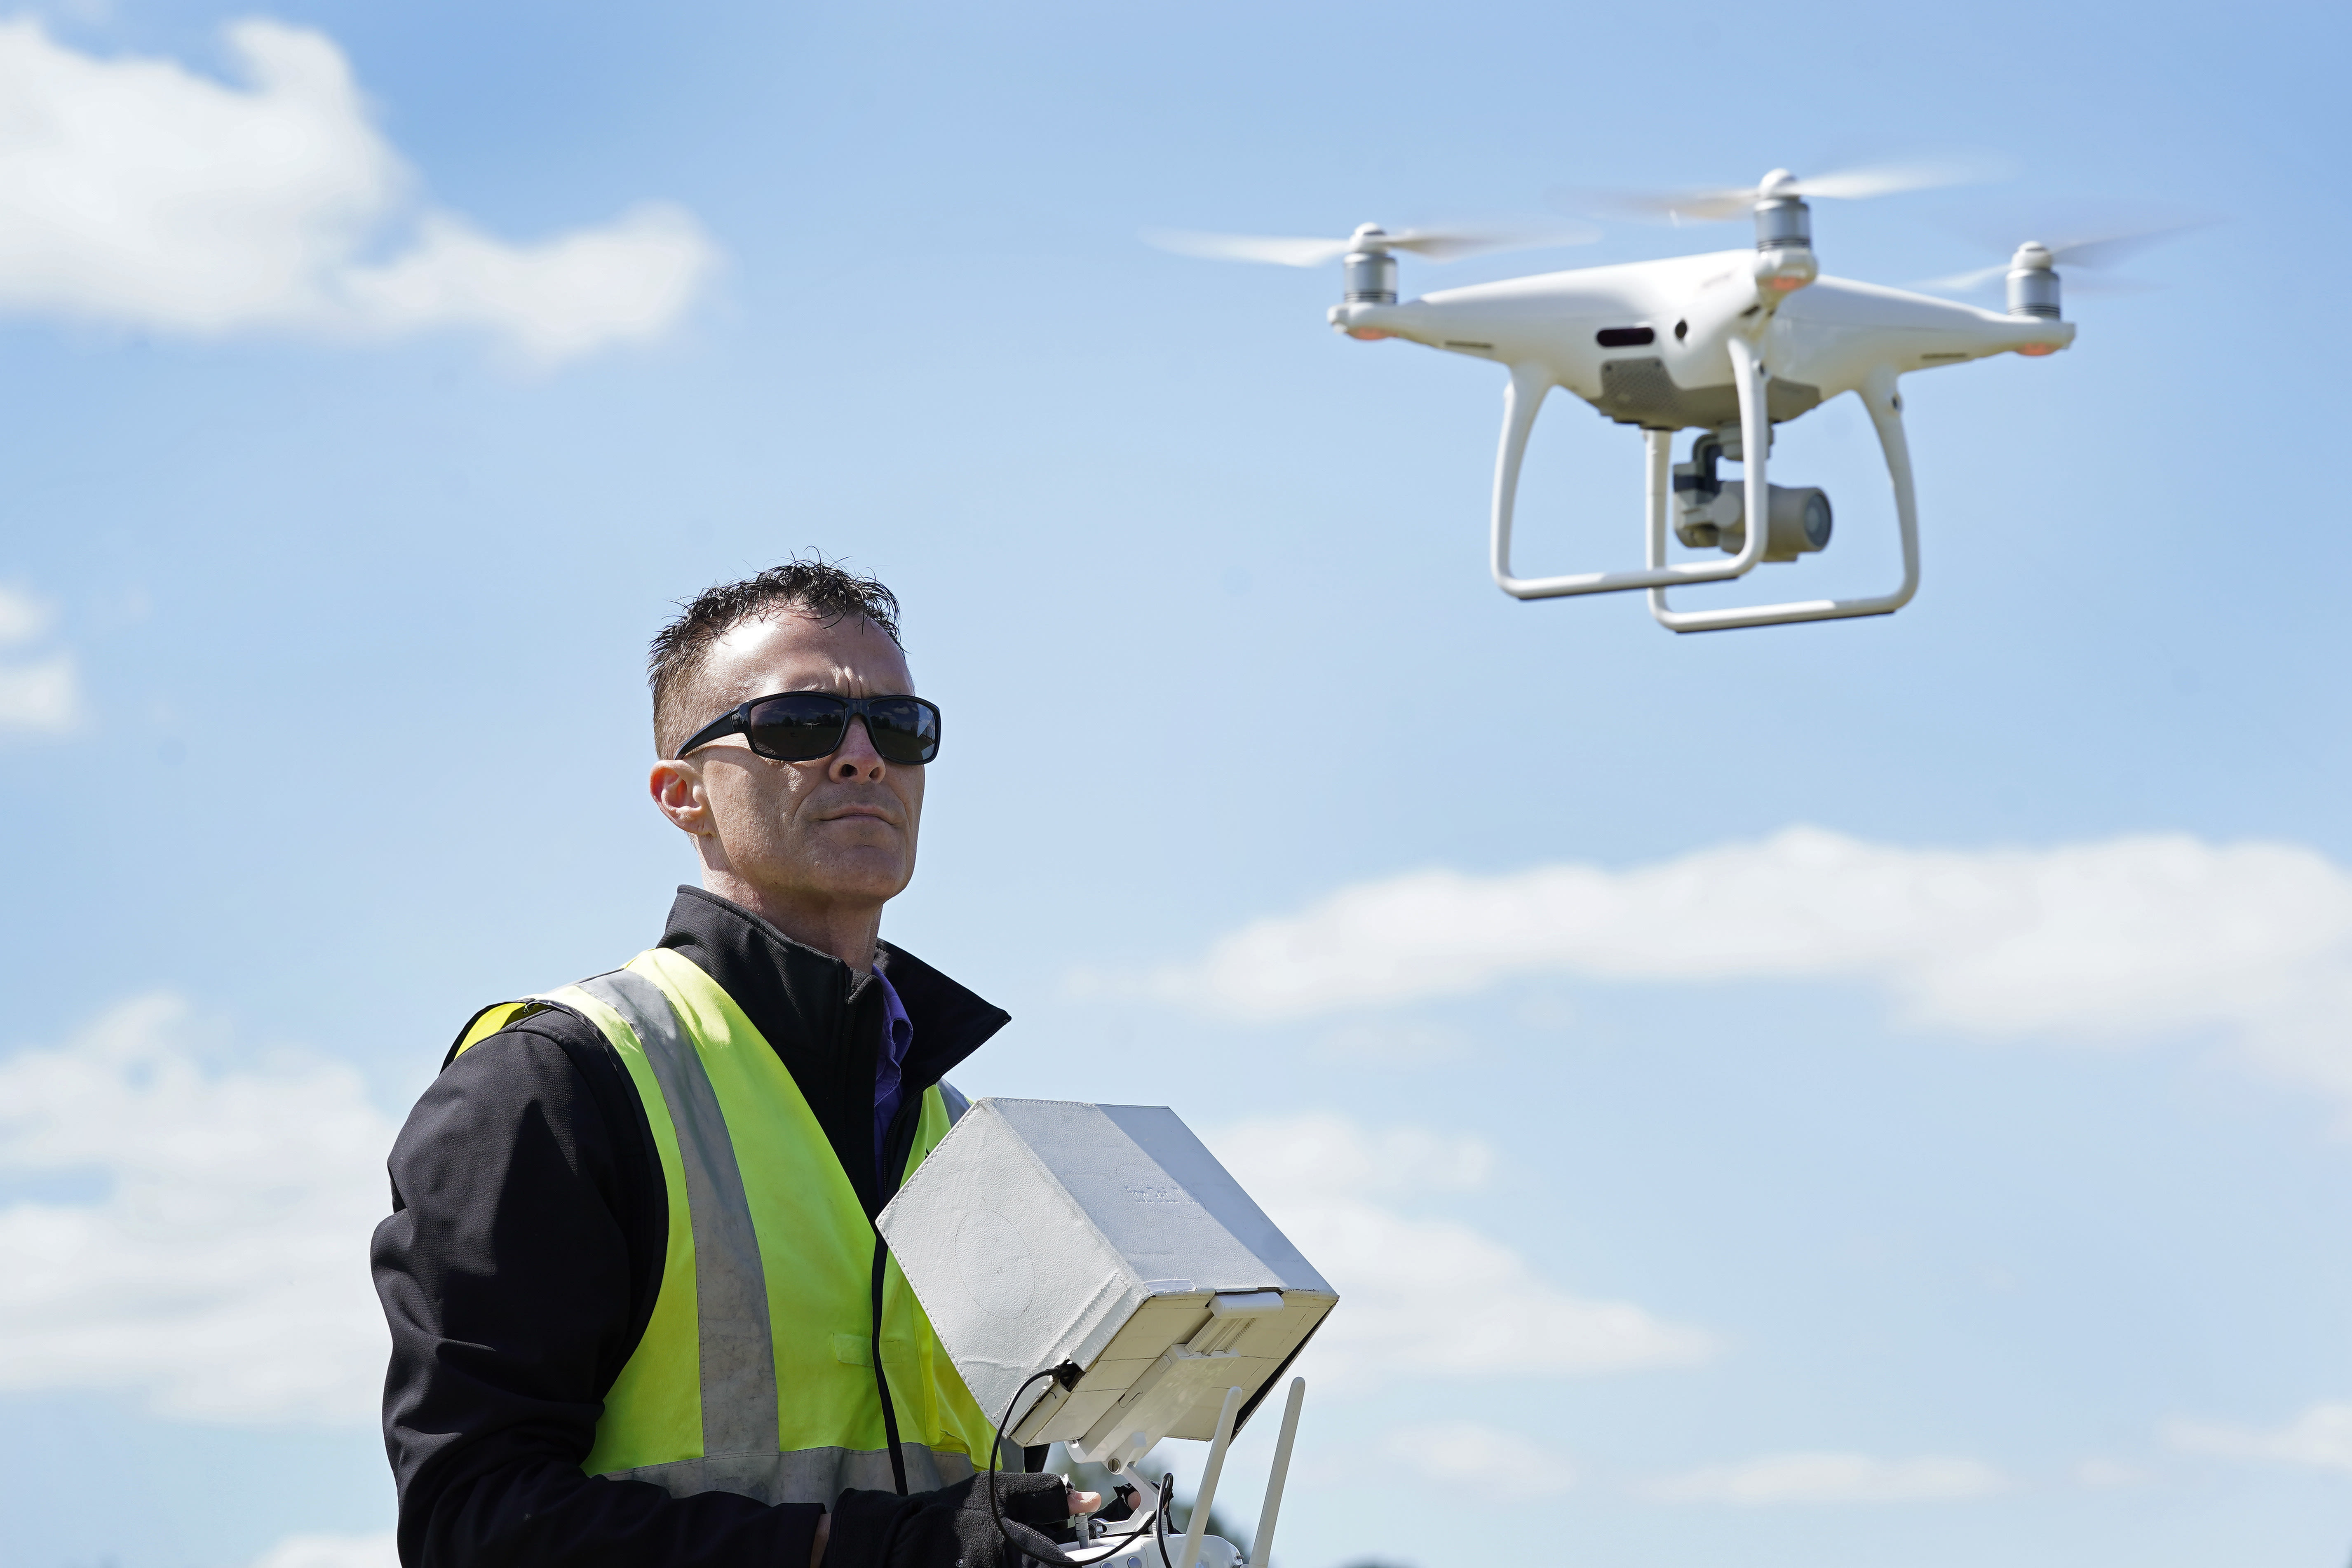 Drone pilot can't offer mapping without North Carolina surveyor's license, court says